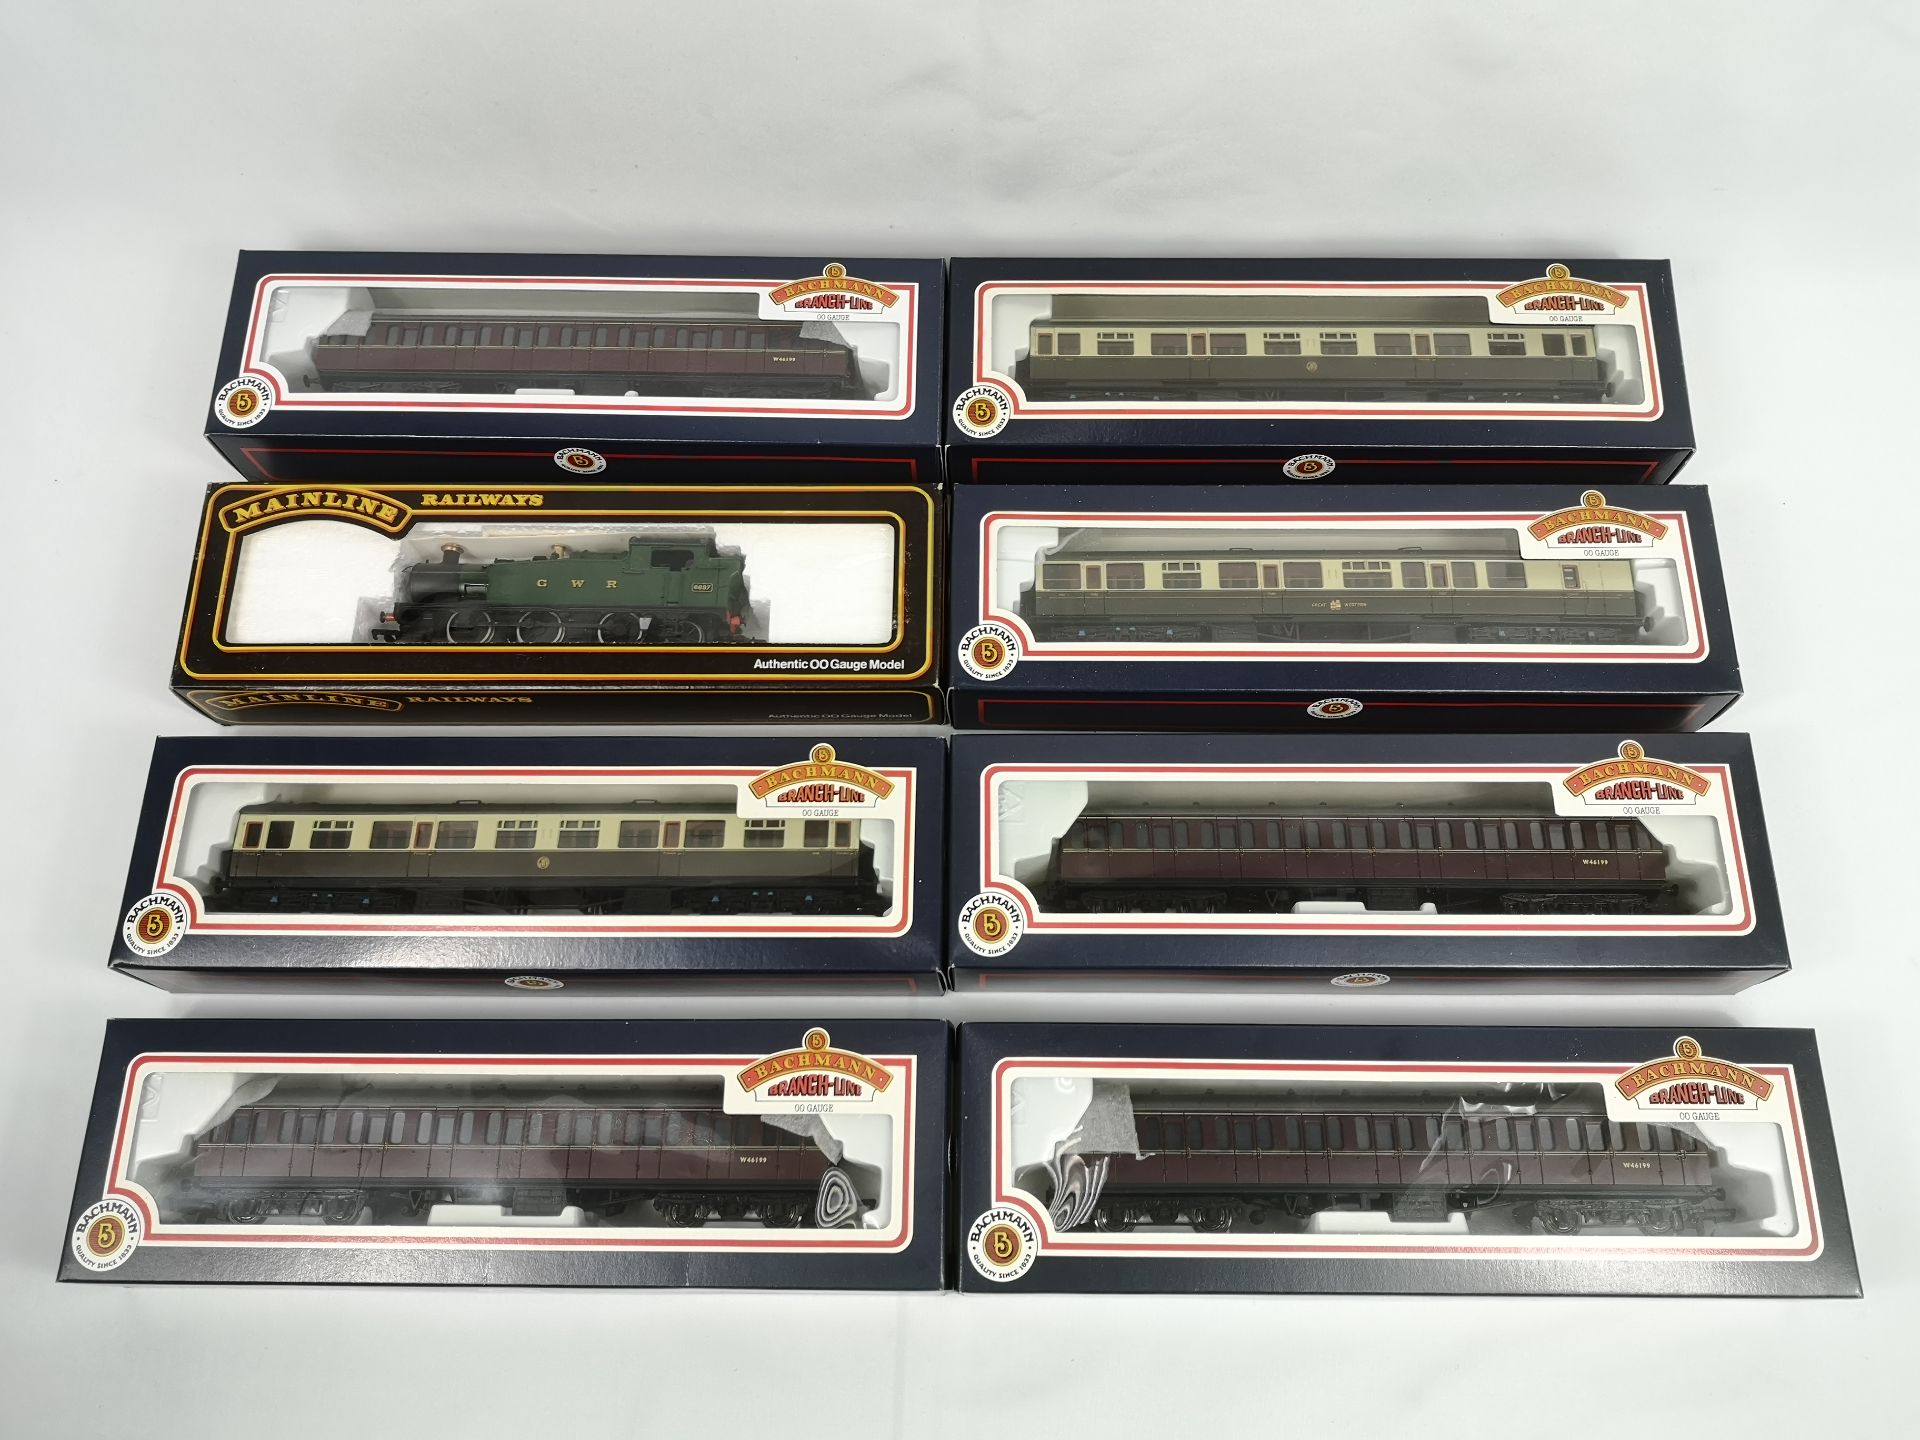 Boxed Mainline Railways locomotive with seve 00 gauge carriages